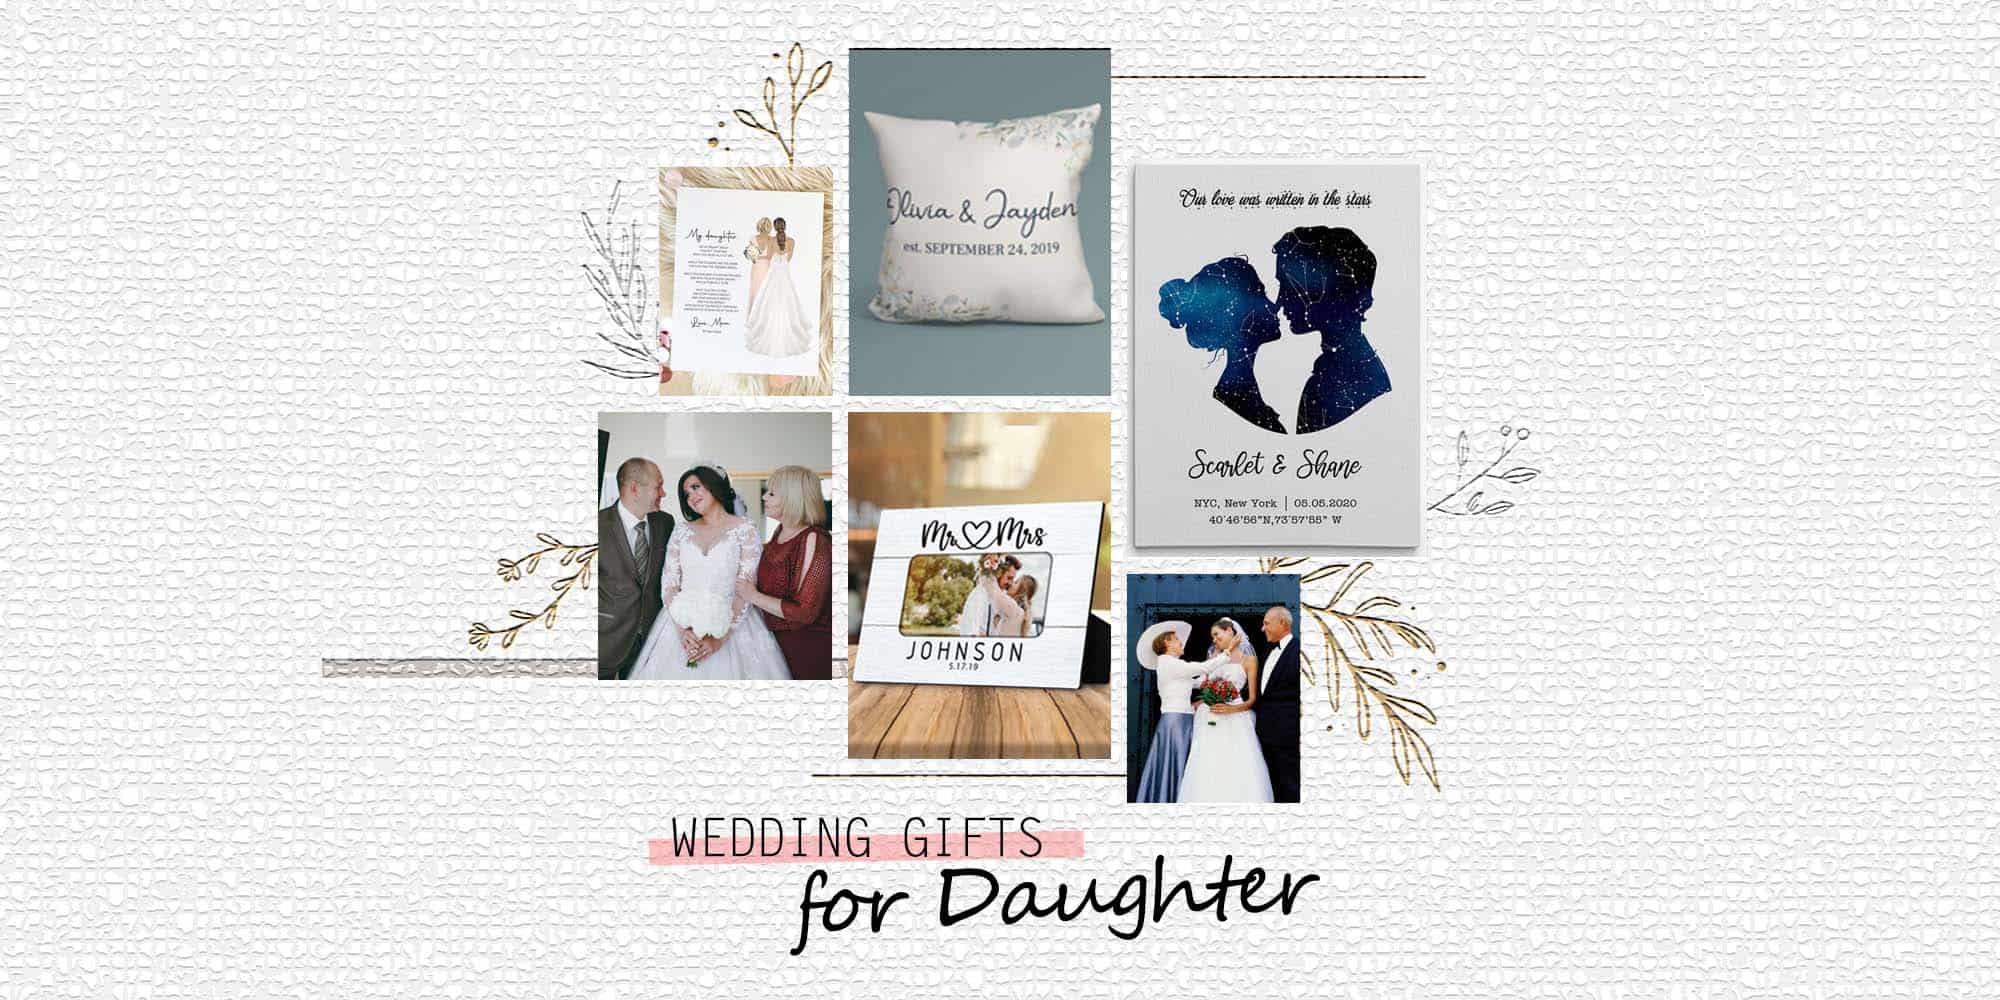 33 Sweet Wedding Gift Ideas for Daughter From Parents 2022 (+ 4 FAQs)